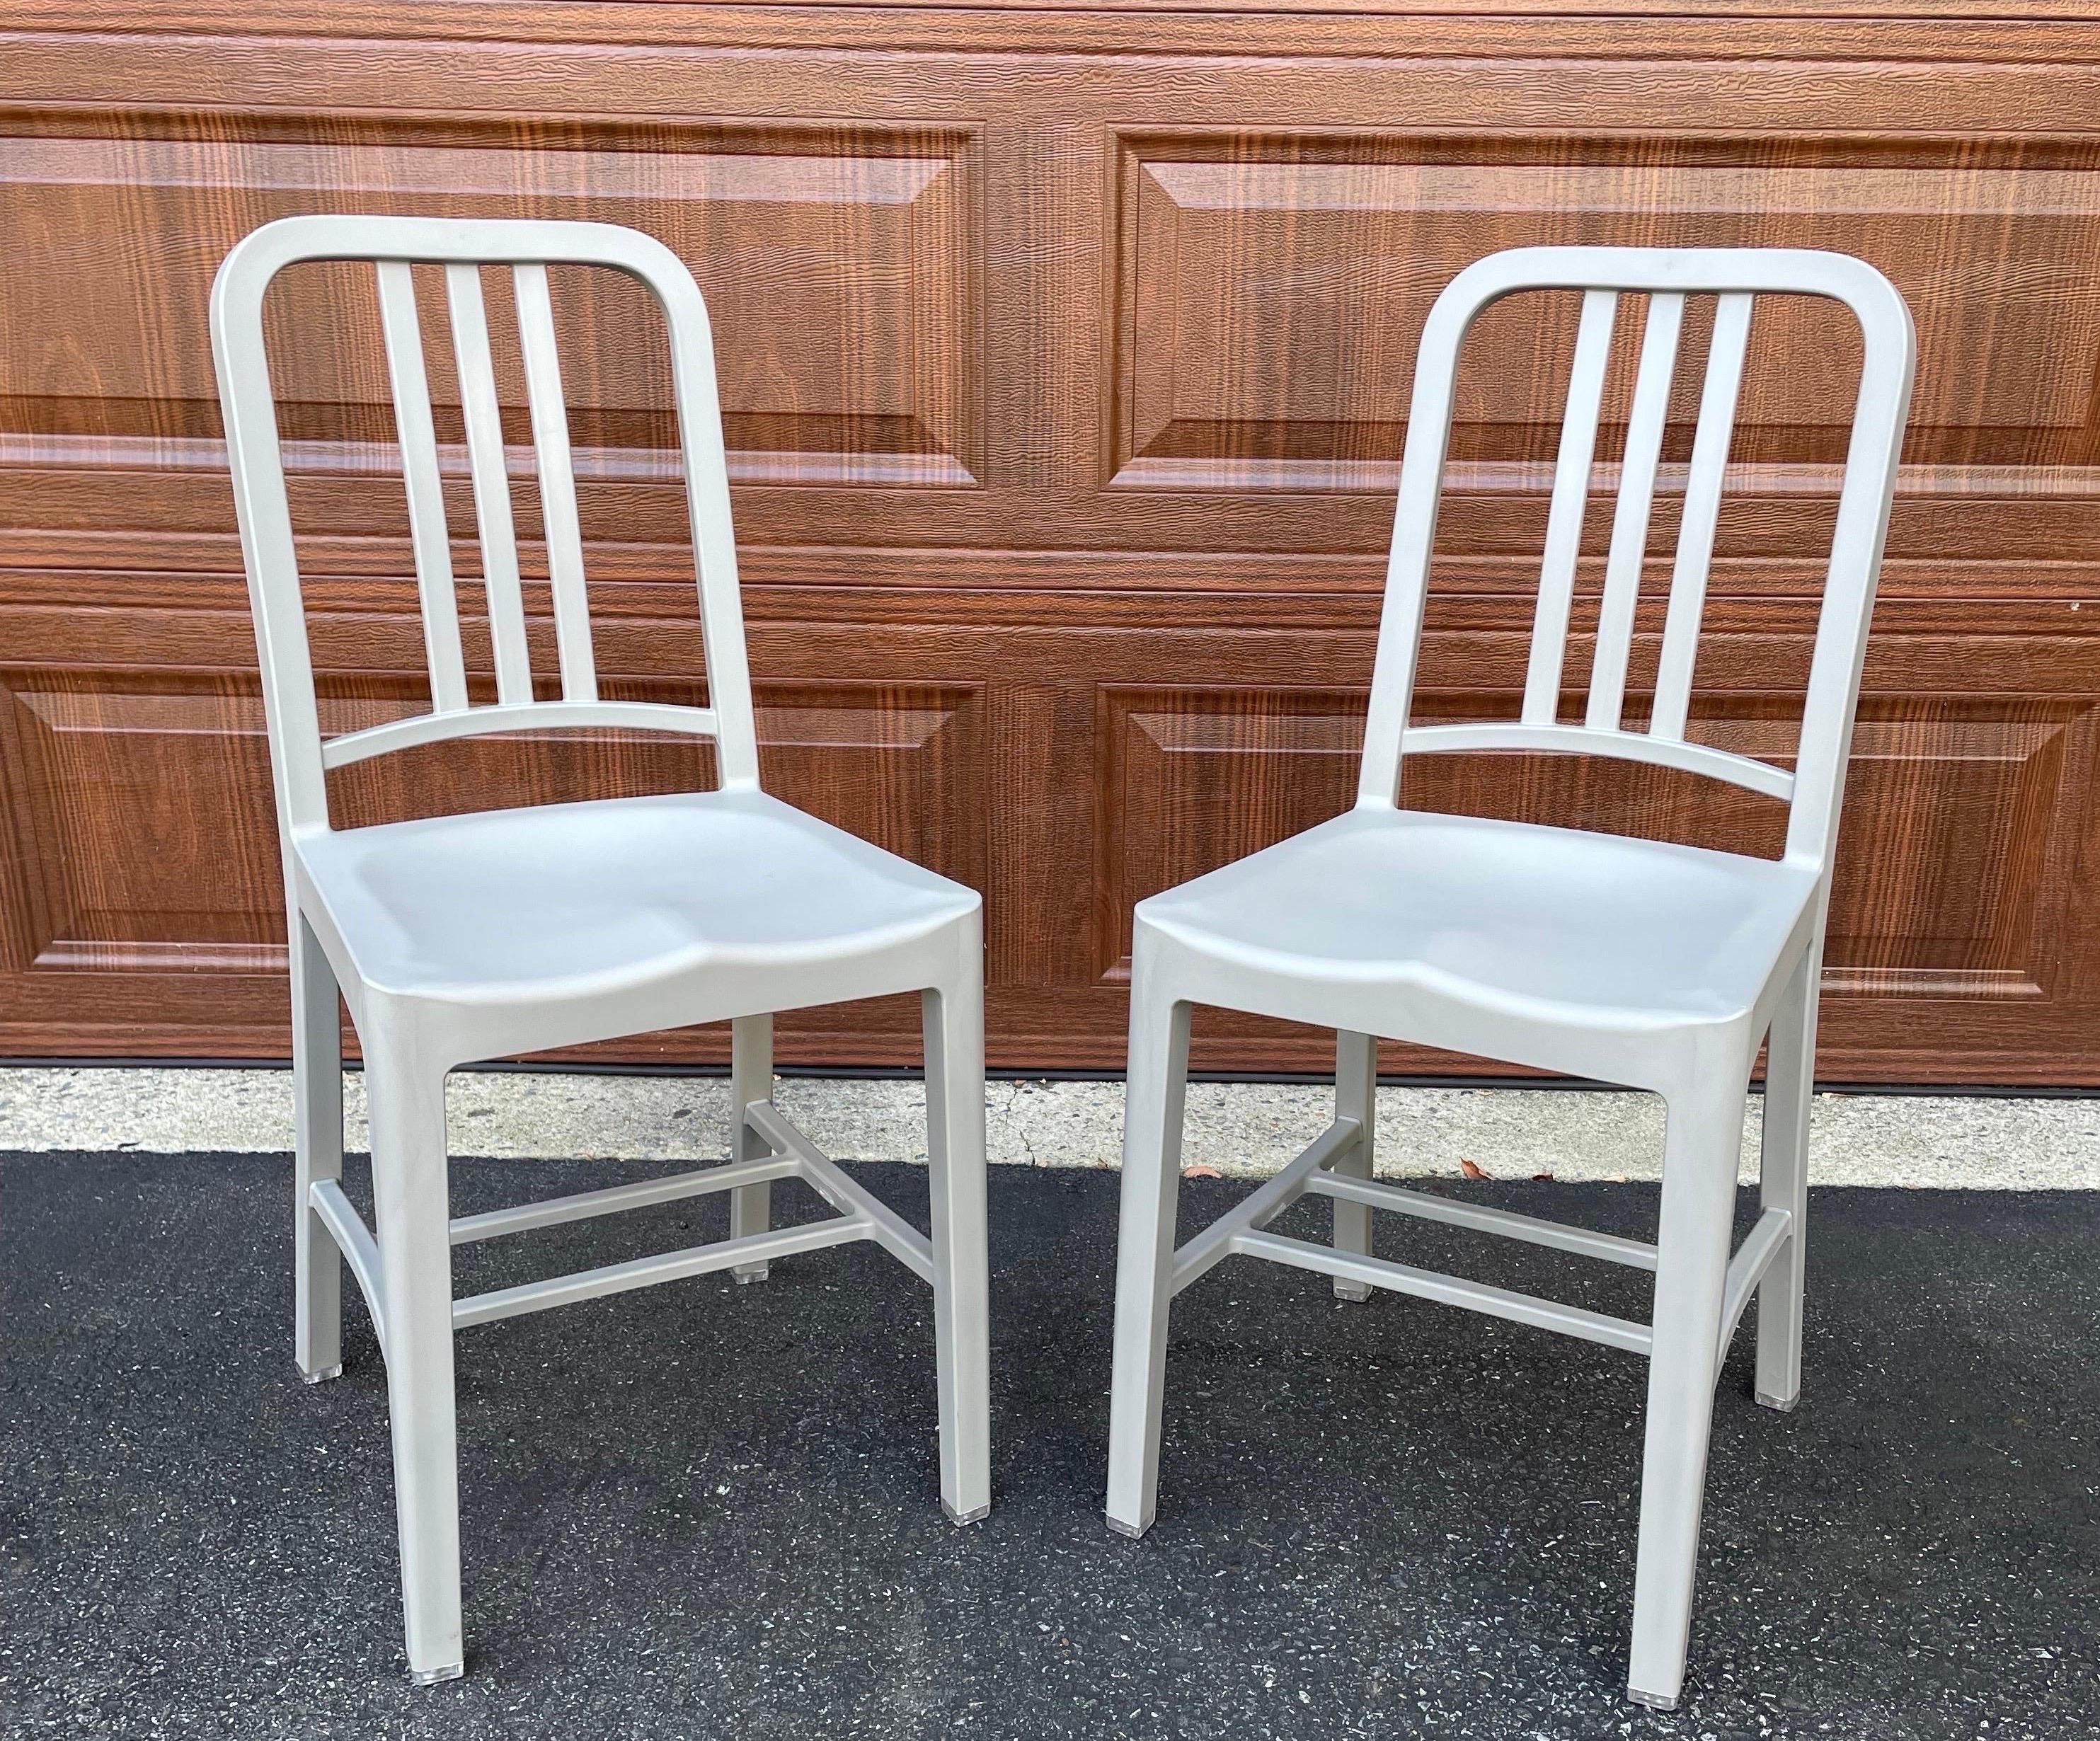 Pair of gray Emeco Navy 111 chairs. Excellent condition, very light if any use. Measures: 15.5” W x 19.5” D x 34” H - seat height 18”.